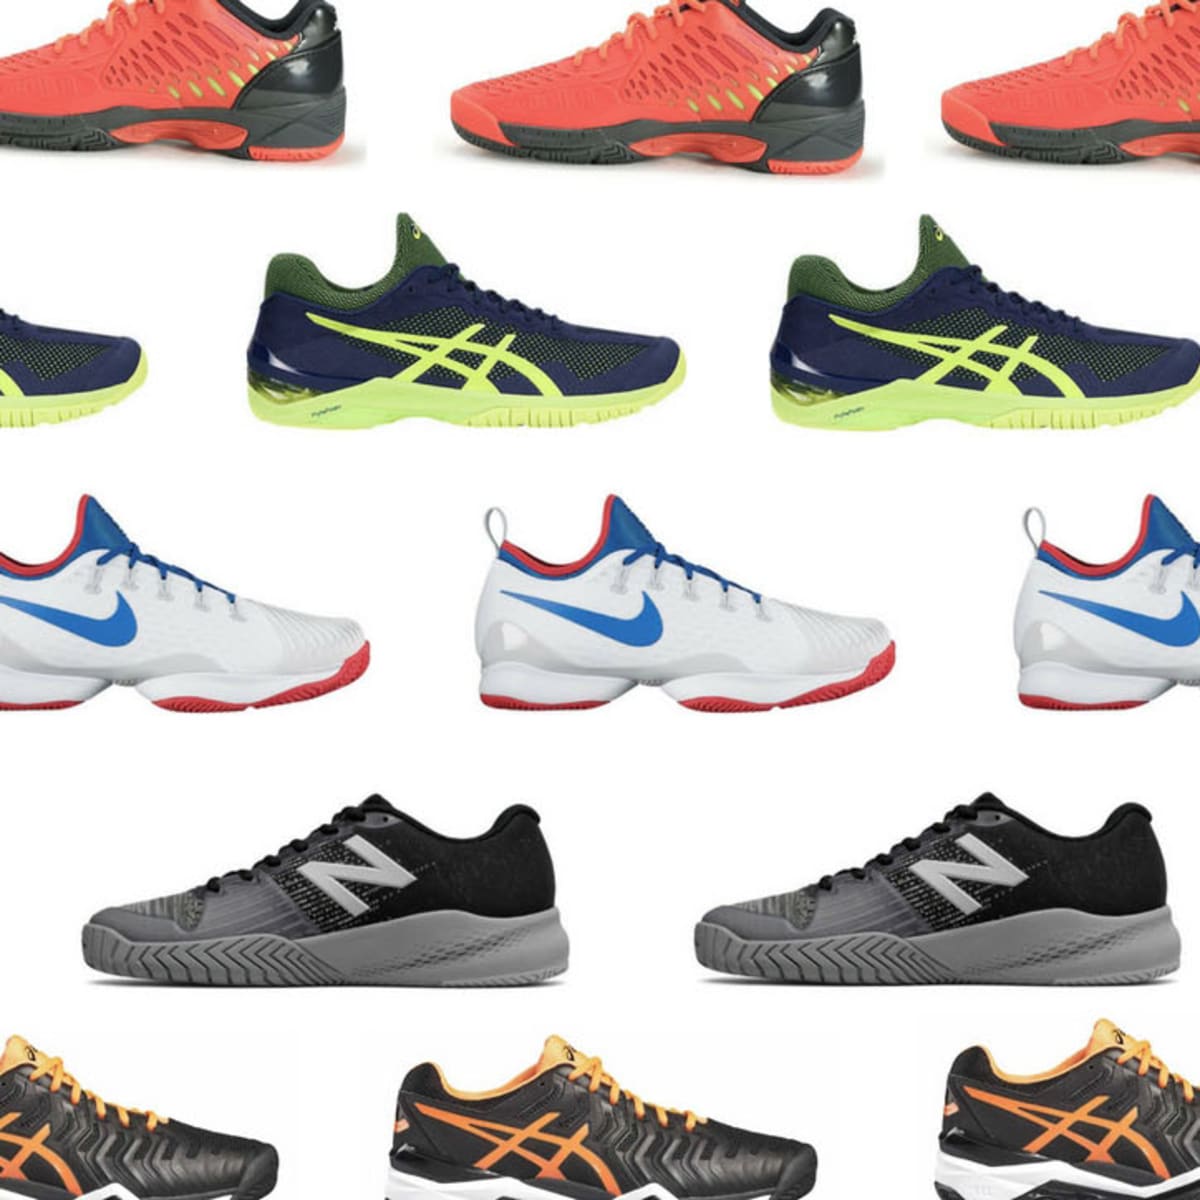 The Best Men's Tennis Shoes for 2017 - Sports Illustrated